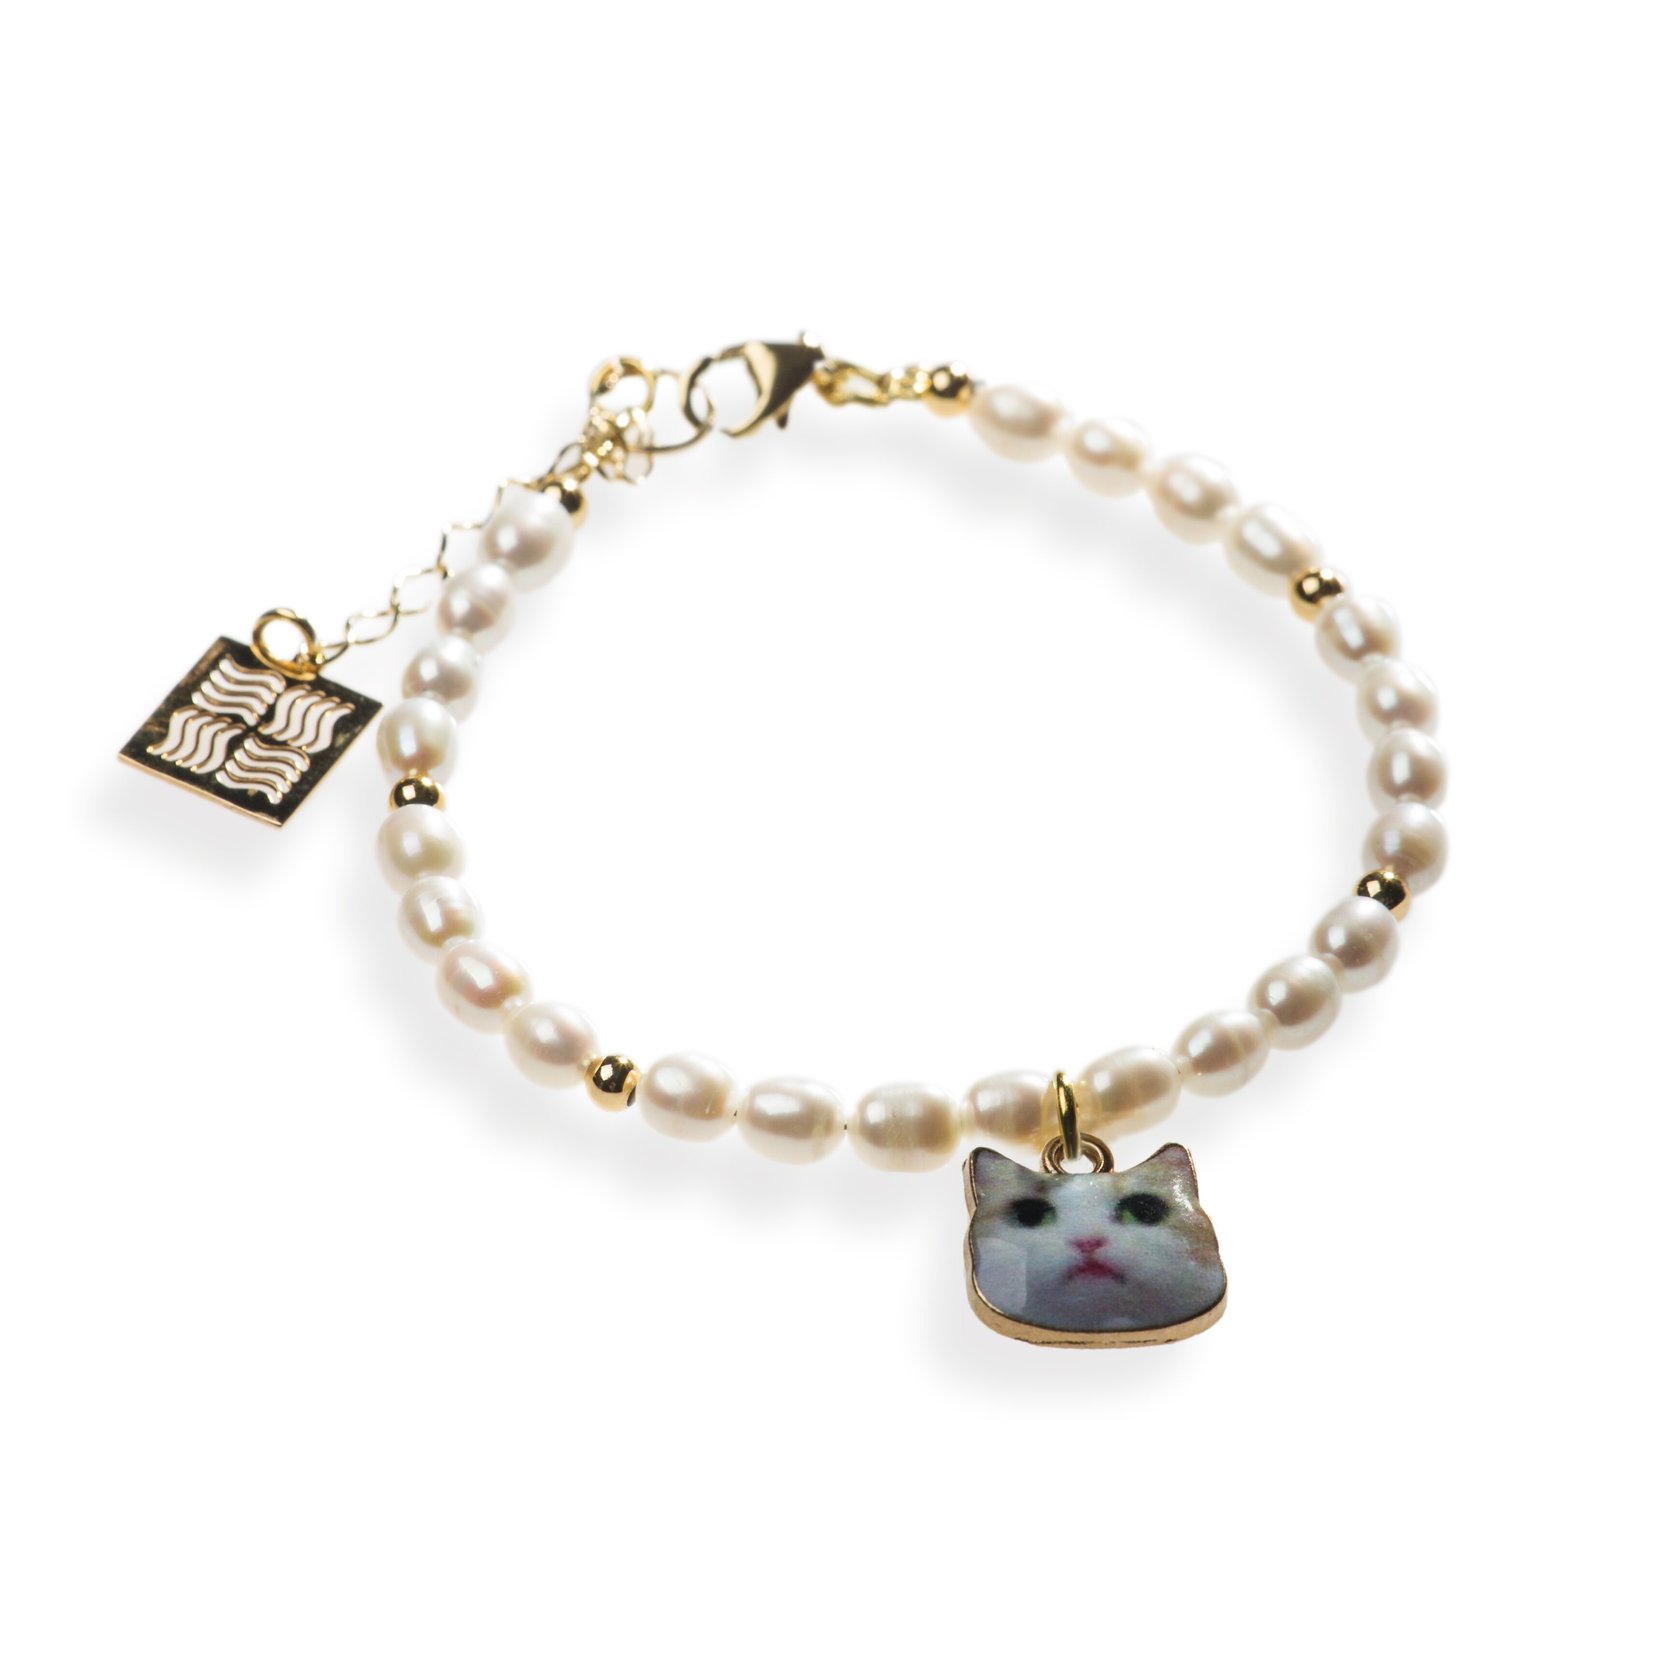 Bracelet of the collection "Six Cats"